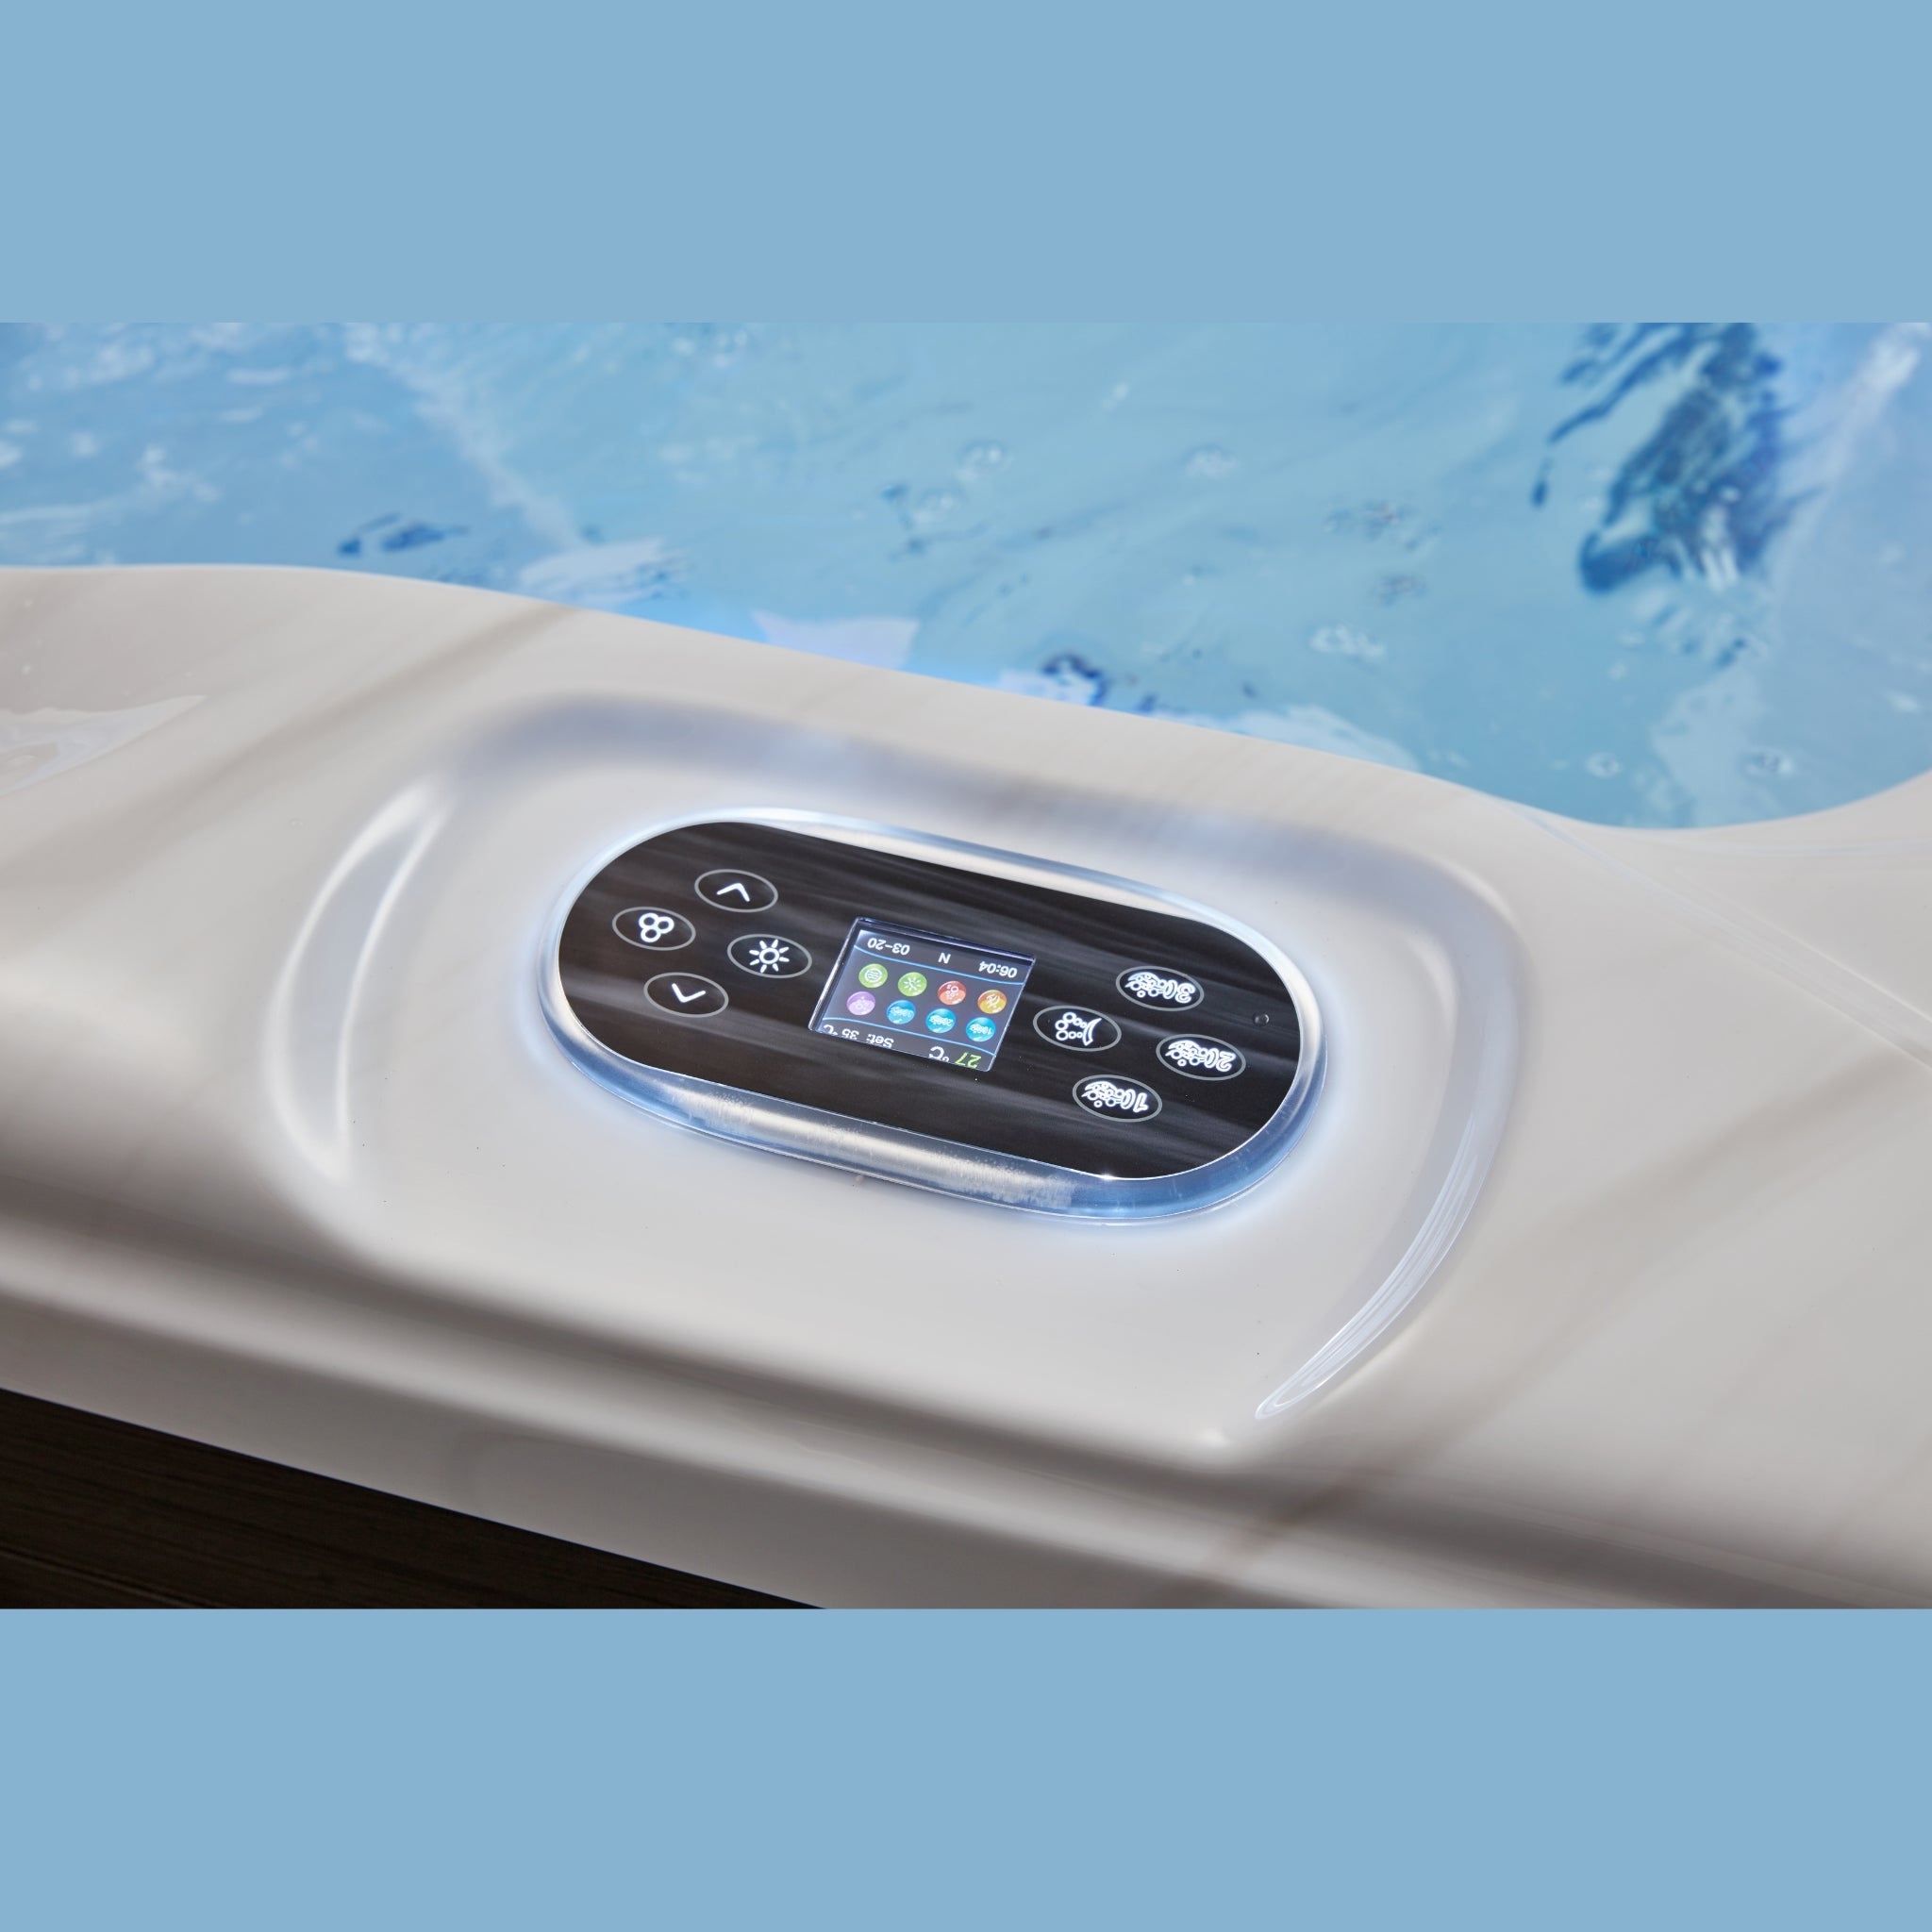 Danika 5-Person 84 Jet Lounger Hot Tub with Bluetooth